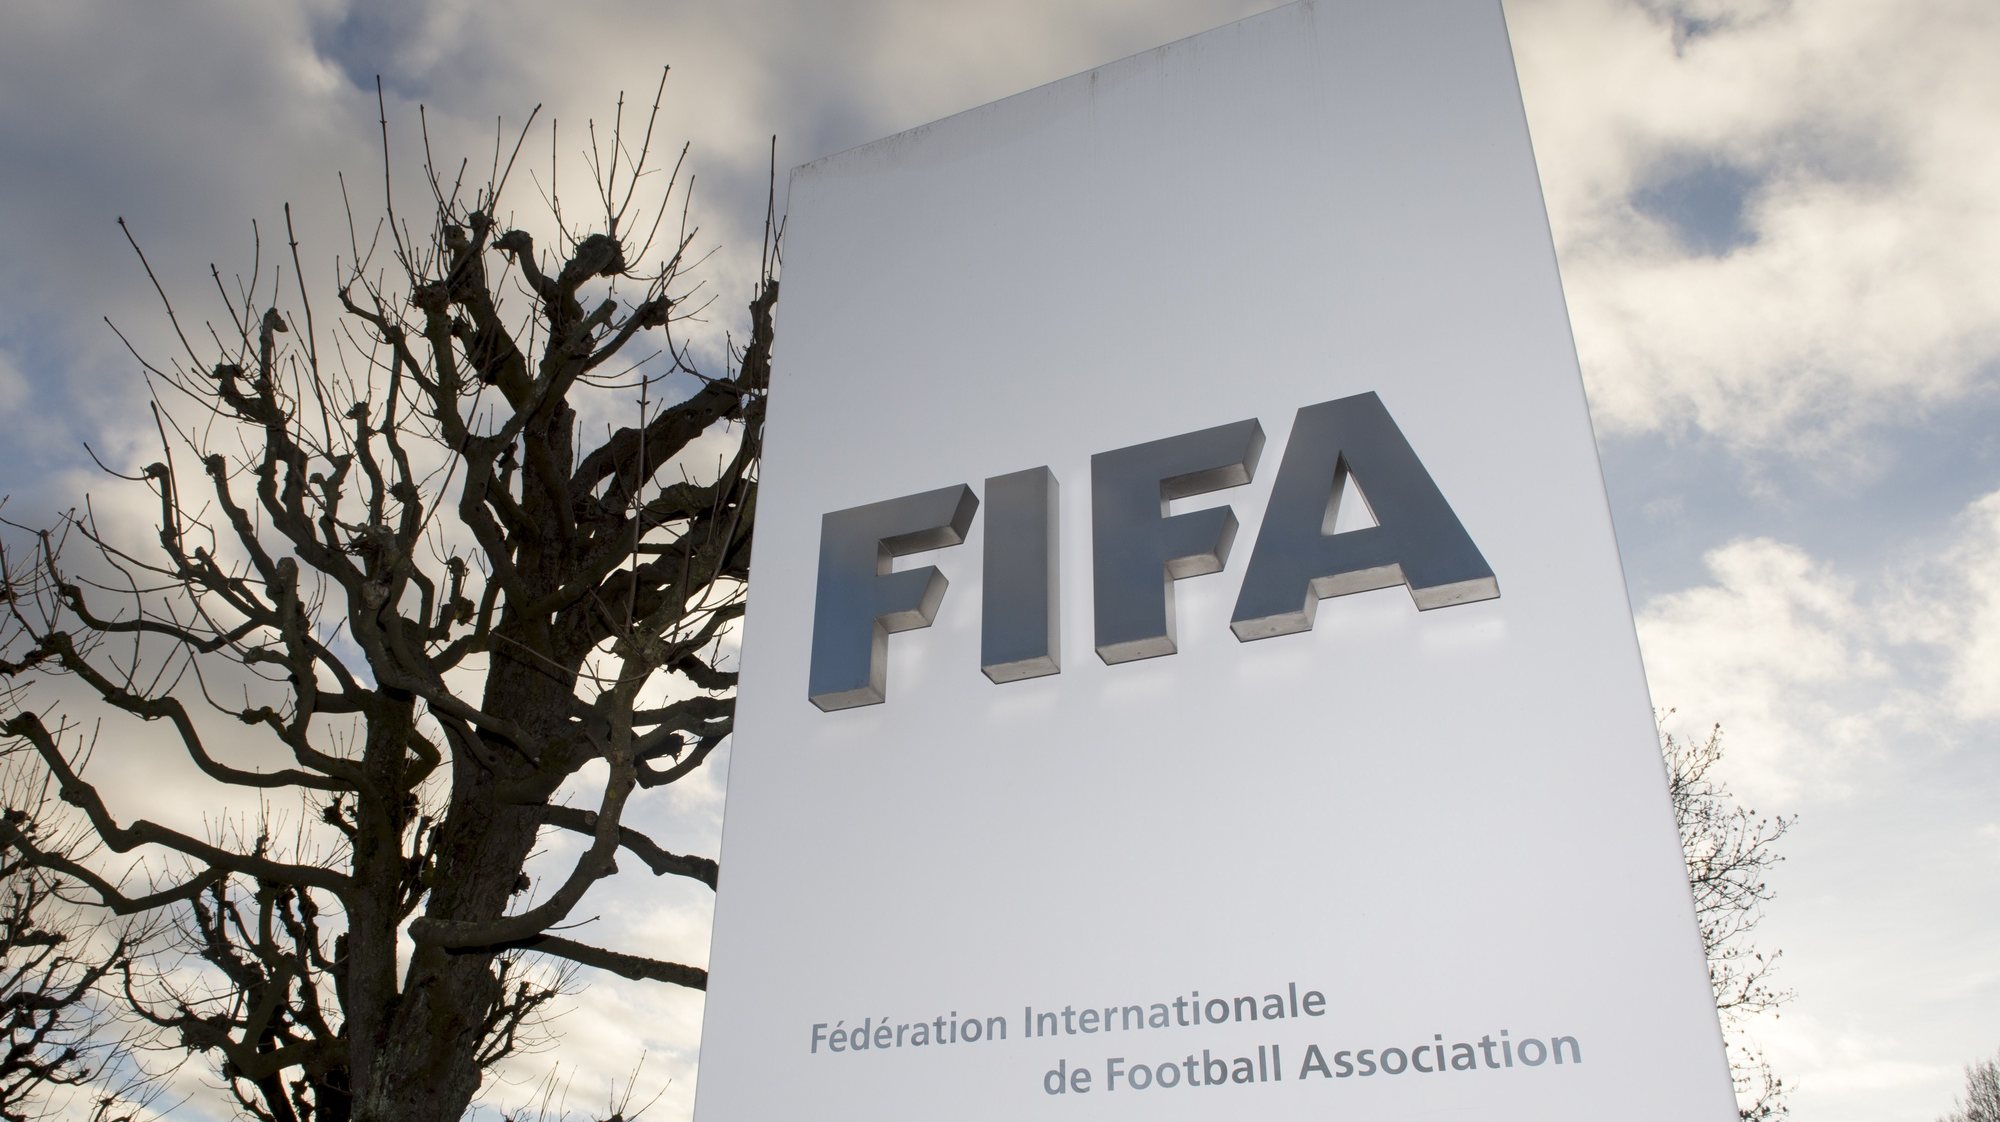 epa09792207 (FILE) - The FIFA logo is pictured outside of the FIFA Headquarters &#039;Home of FIFA&#039; in Zurich, Switzerland, 17 December 2015 (re-issued on 28 February 2022). The world&#039;s football governing body FIFA together with the governing body of European football UEFA announced on 28 February 2022 to have decided together &#039;that all Russian teams, whether national representative teams or club teams, shall be suspended from participation in both FIFA and UEFA competitions until further notice&#039;.  EPA/WALTER BIERI *** Local Caption *** 52472788